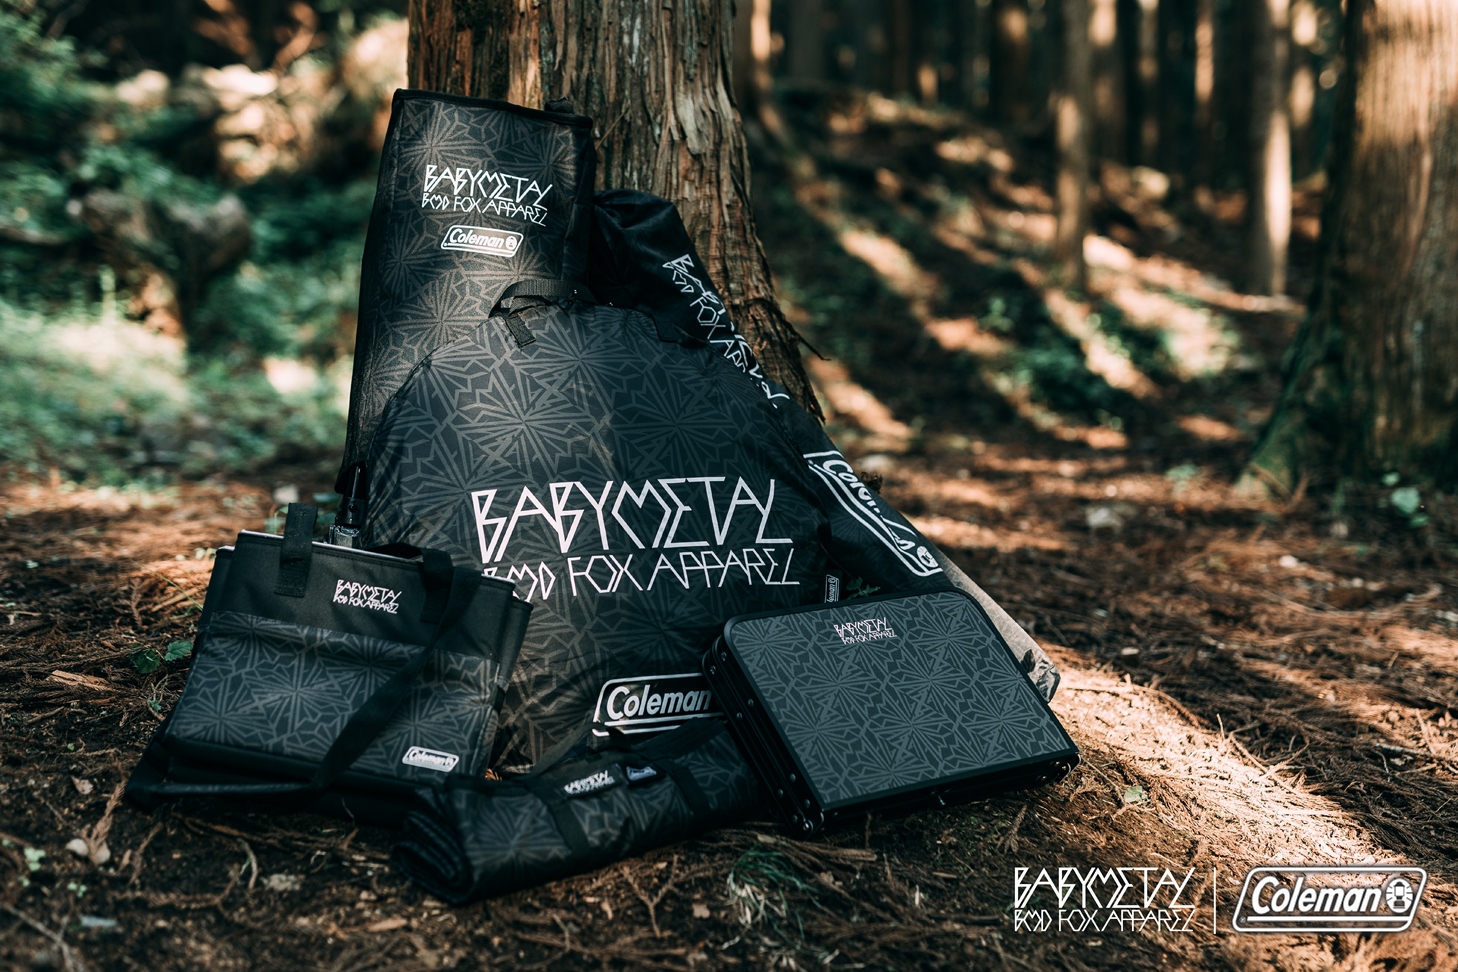 BABYMETAL Collaborates with COLEMAN to Produce Outdoor Equipment